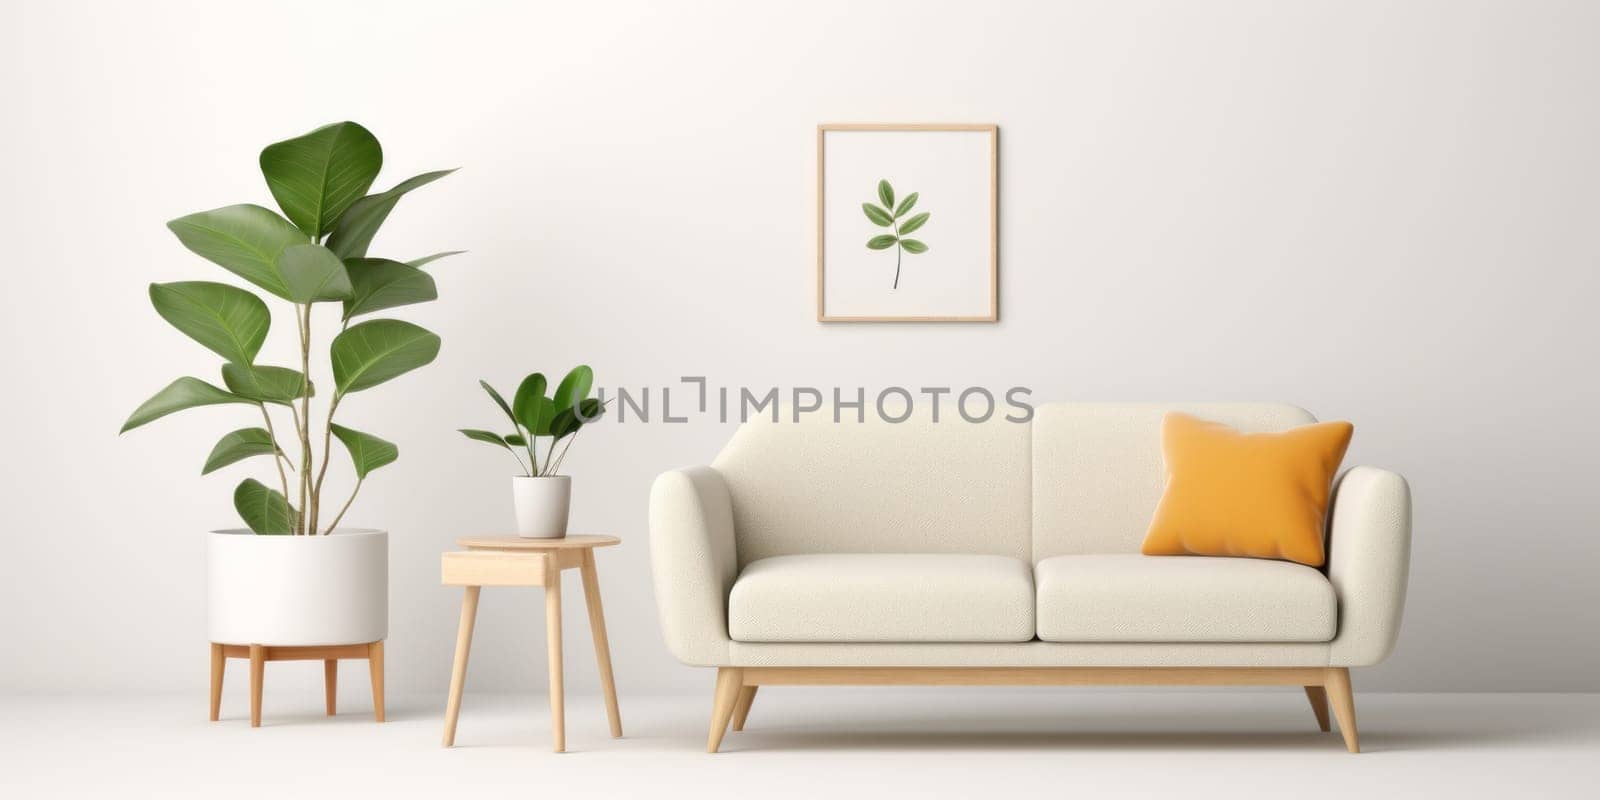 A white couch sitting next to a plant in a living room